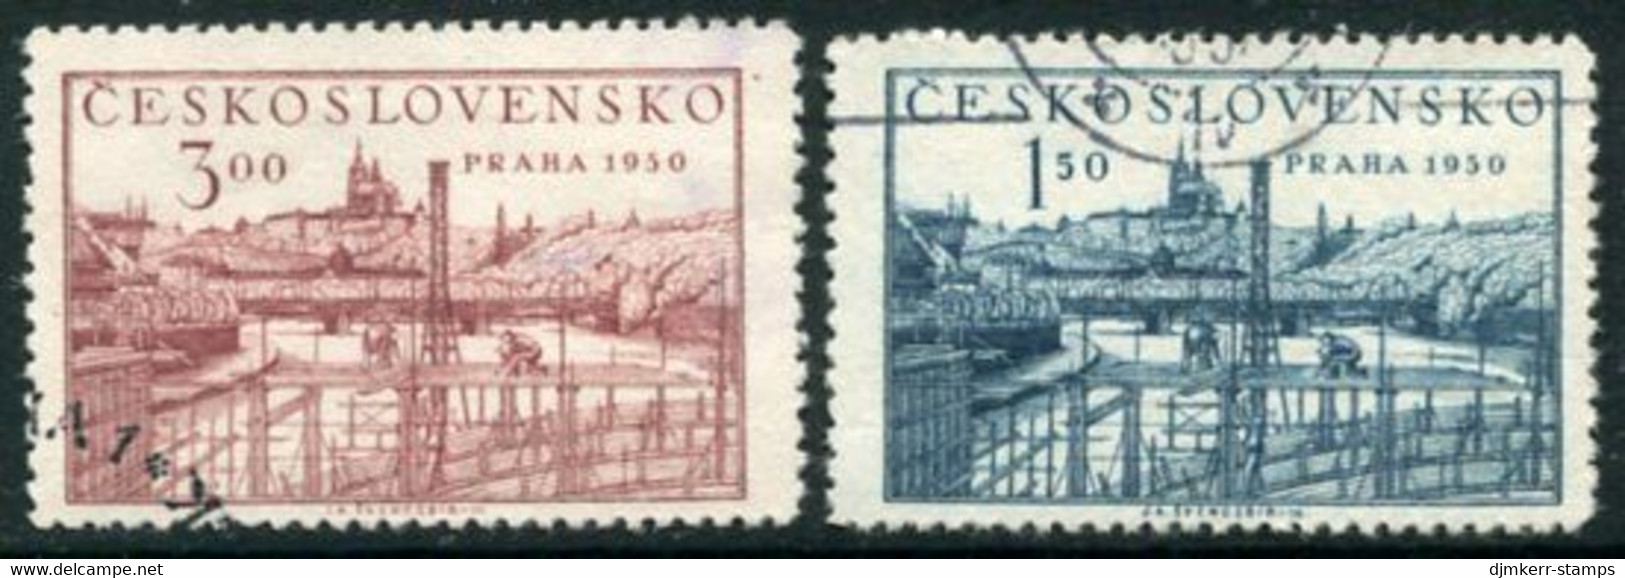 CZECHOSLOVAKIA 1950 Prague Philatelic Exhibition  Used.  Michel 638A-39A - Used Stamps